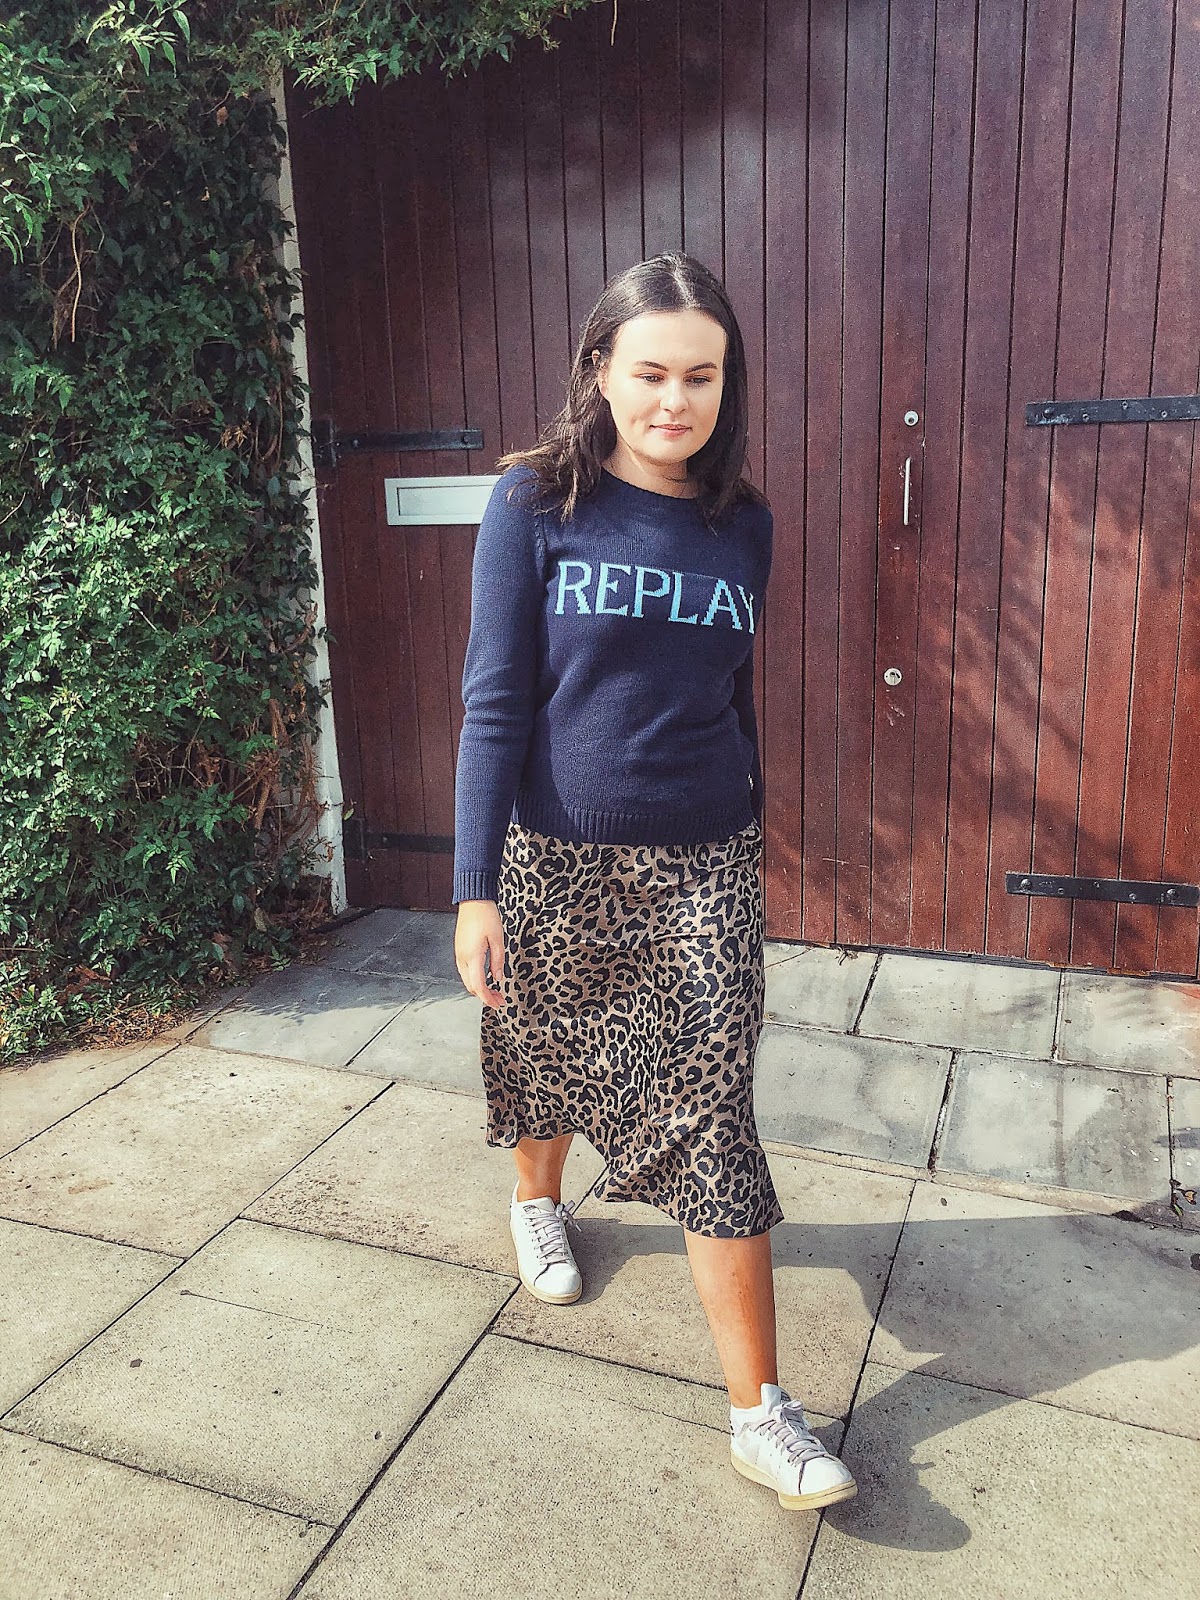 replay womens jumper, replay uk, asos leopard skirt, leopard midi skirt, asos sold out skirt , ootd, uk fashion blogger, autumn style 2018